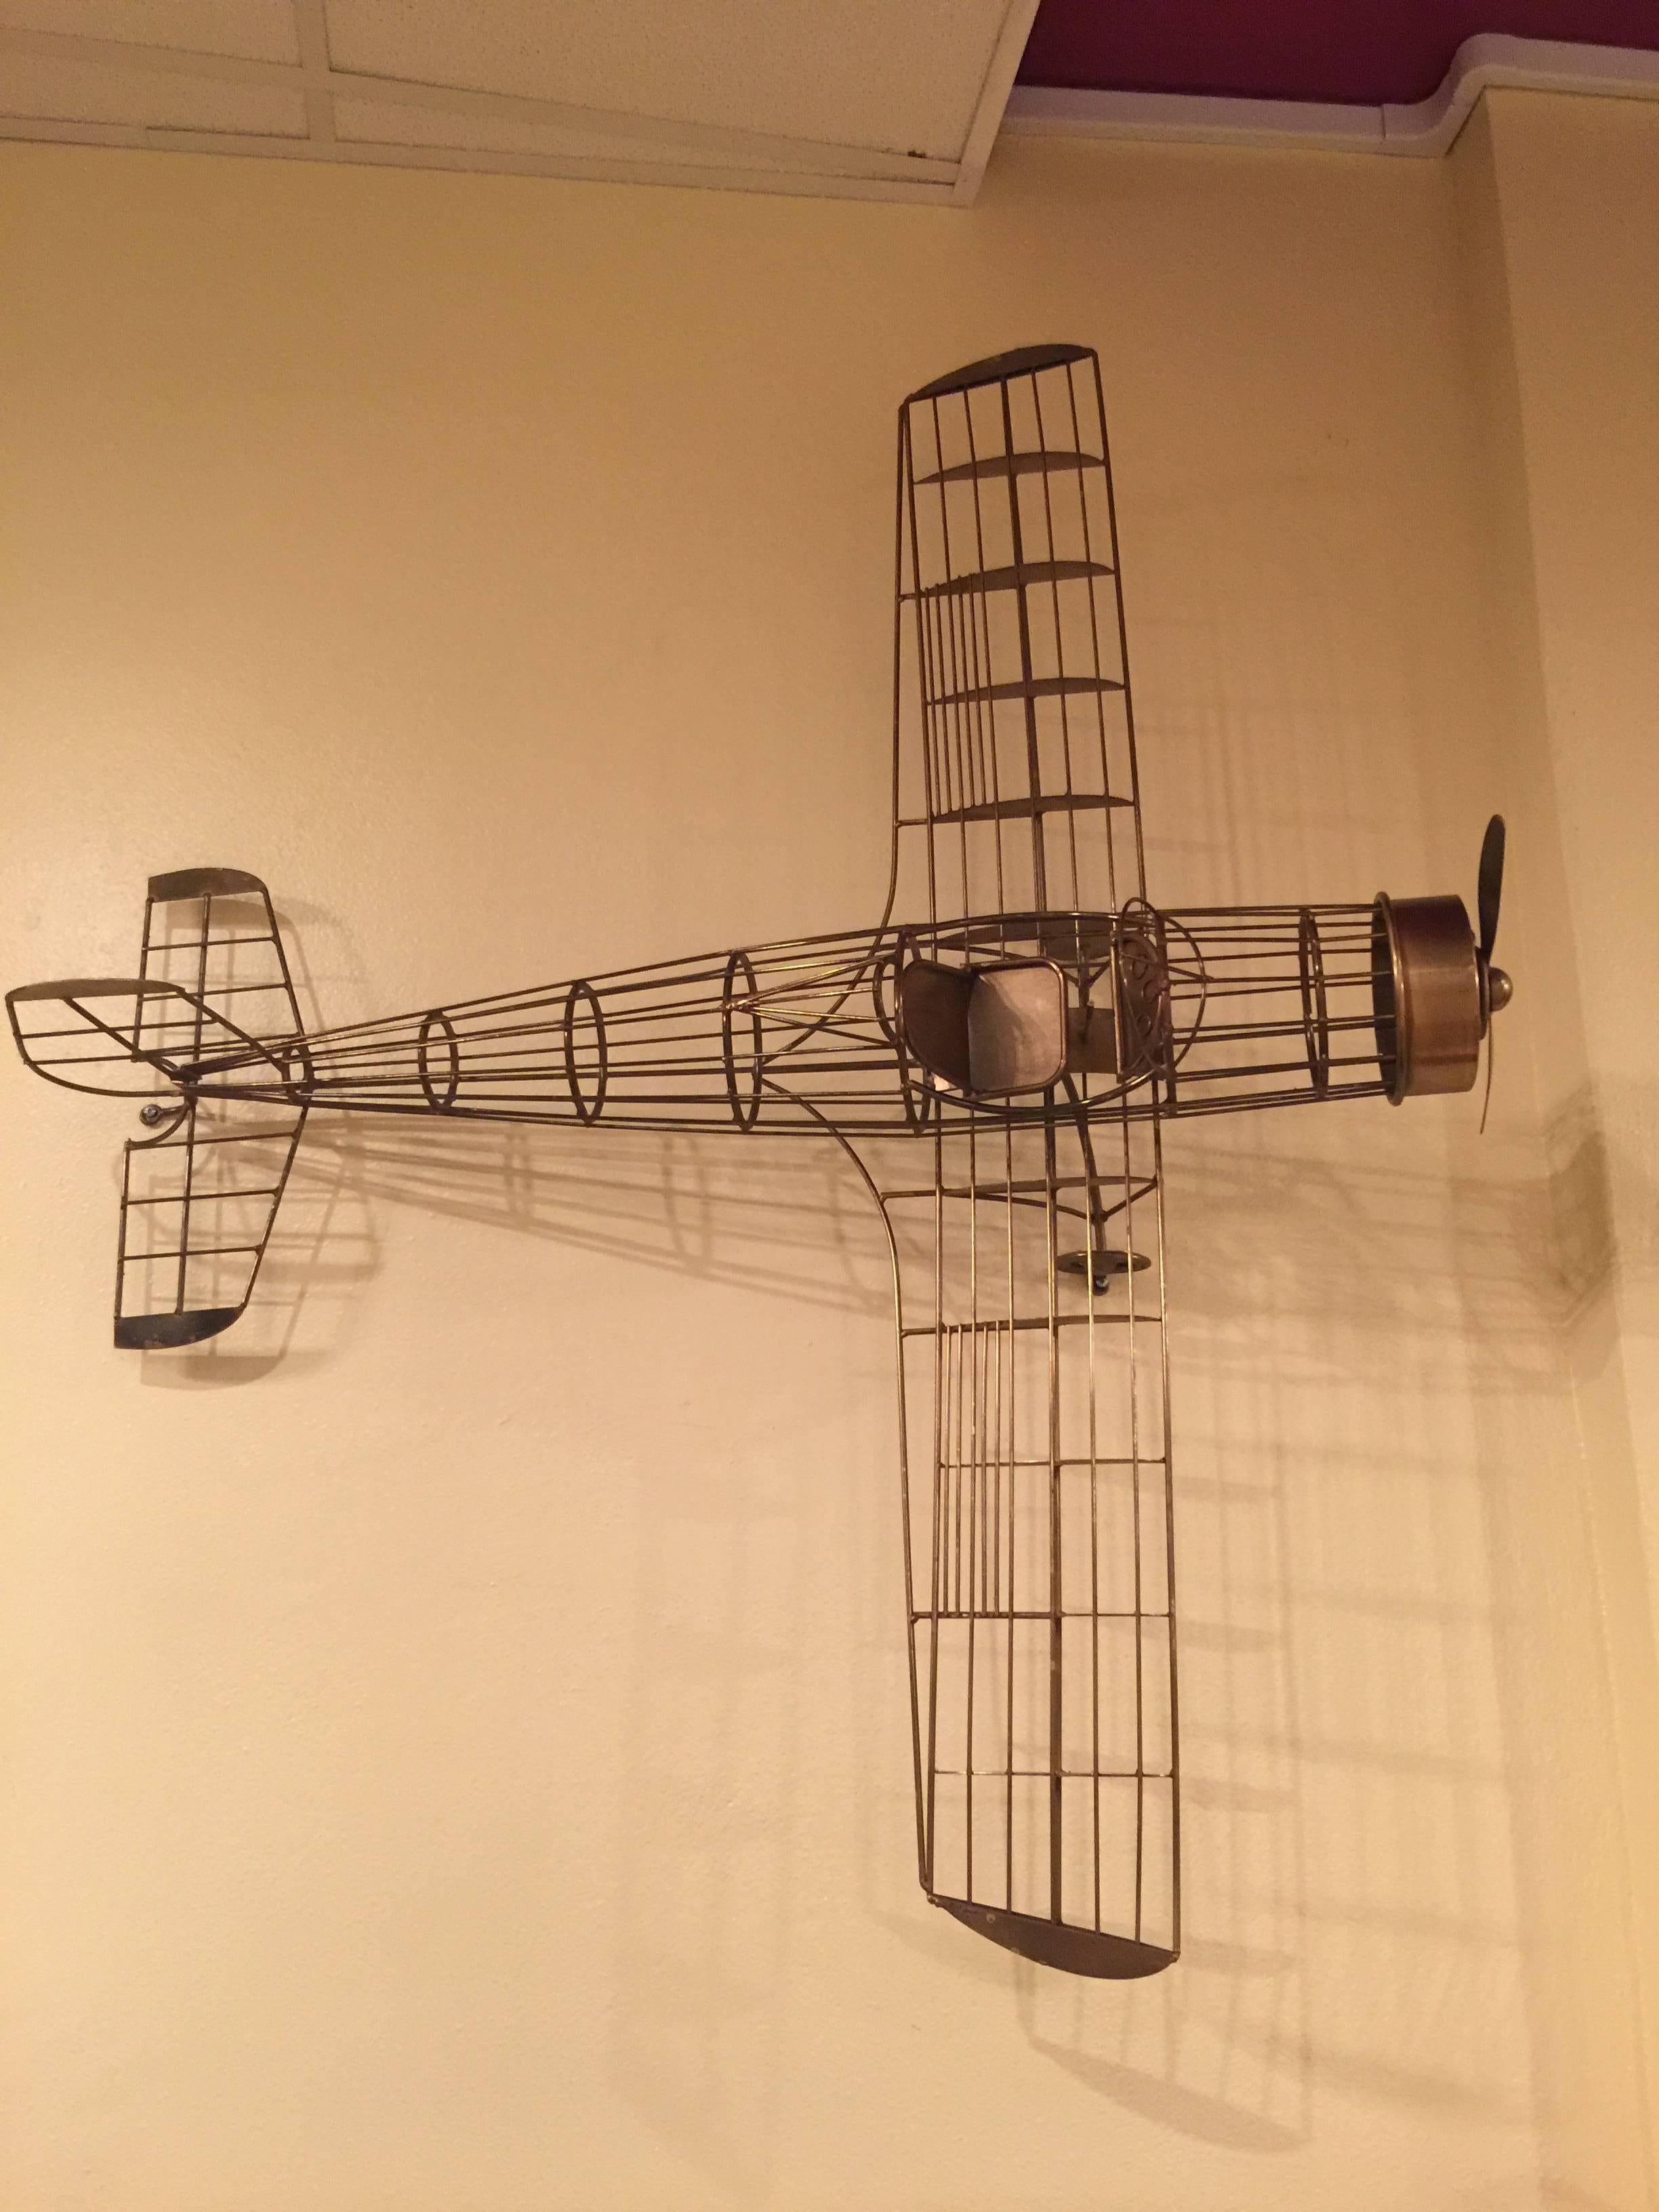 Gold tone sculpted three dimensional metal wire form airplane with propeller that spins. Great mounted on the wall or hung as a mobile from a decorative ring mounted from the ceiling.